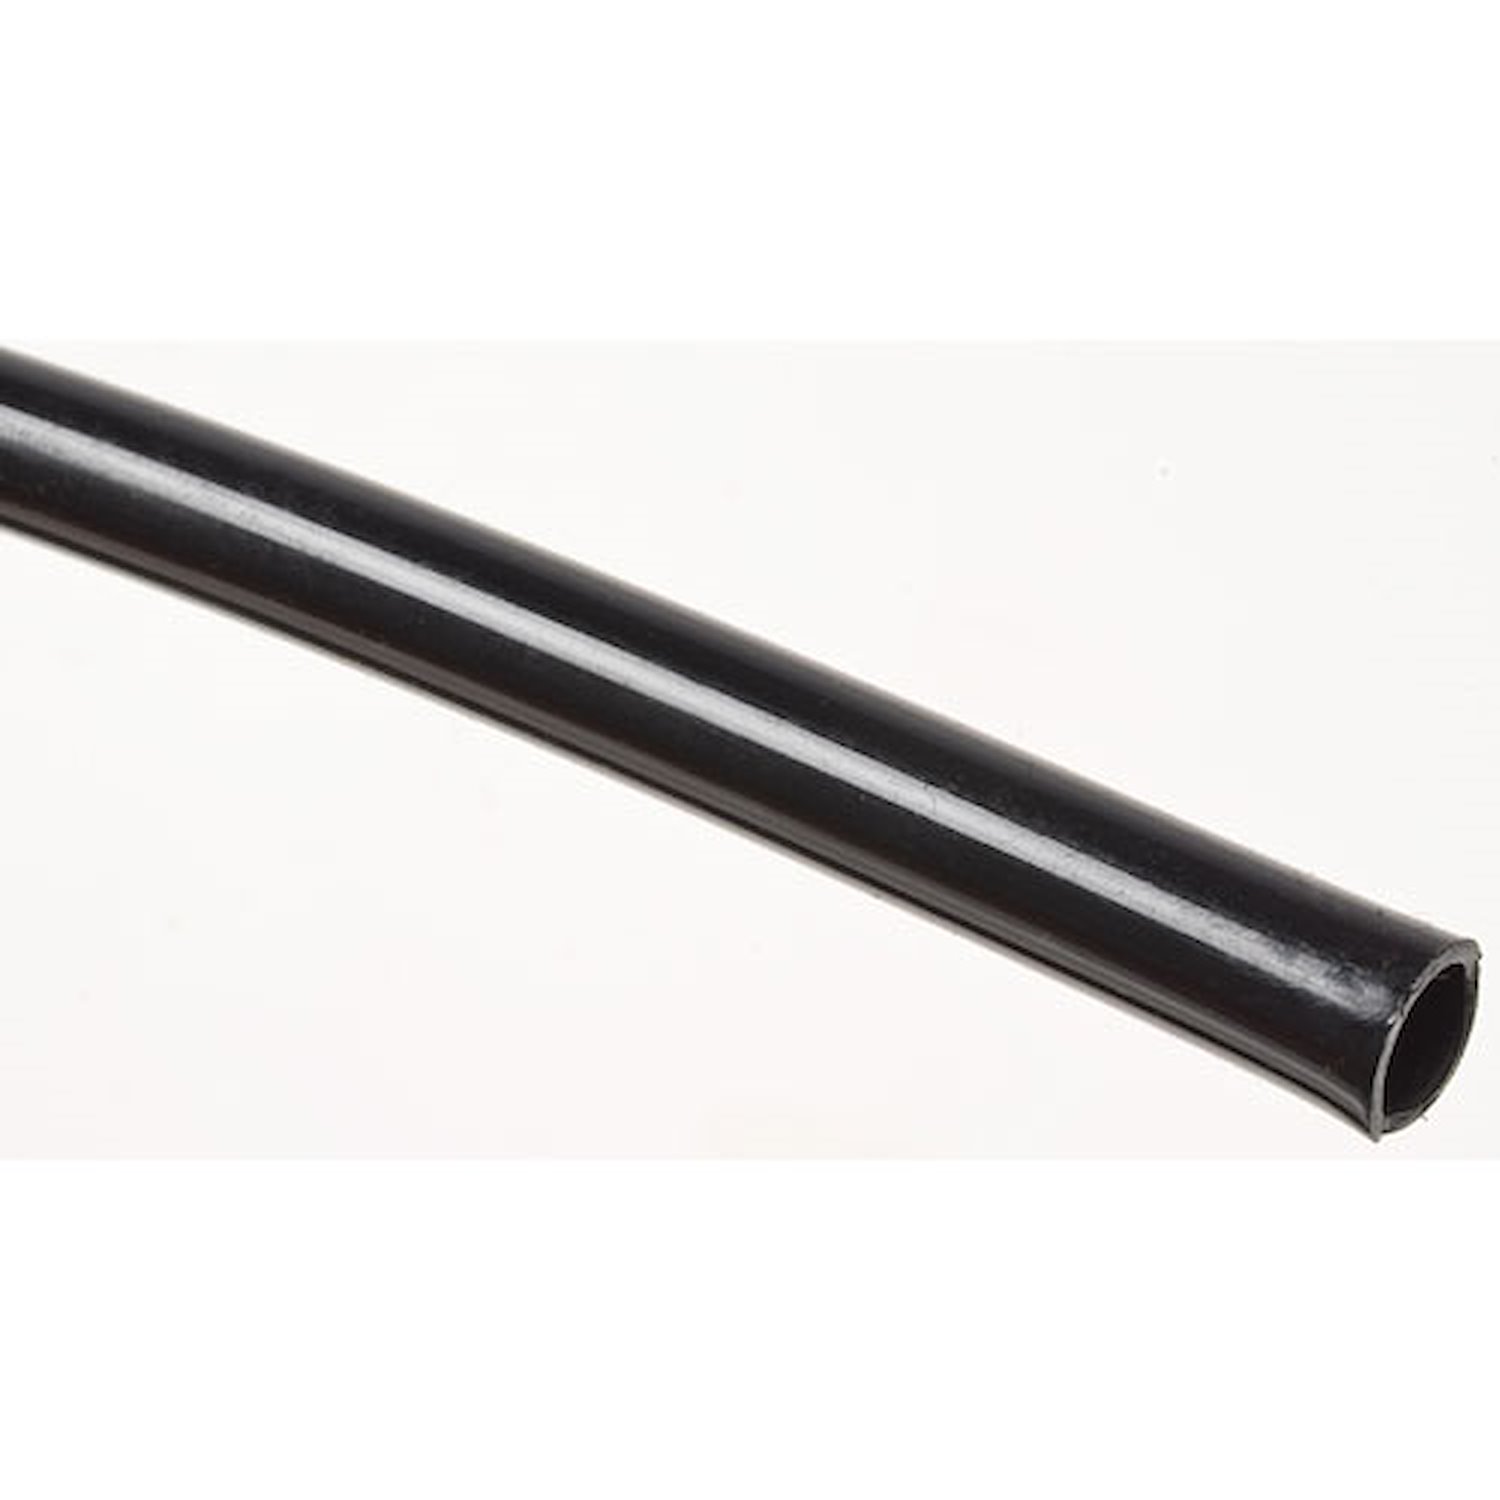 Nylon Fuel Injection Tubing [3/8 in. O.D. x 10 ft.]